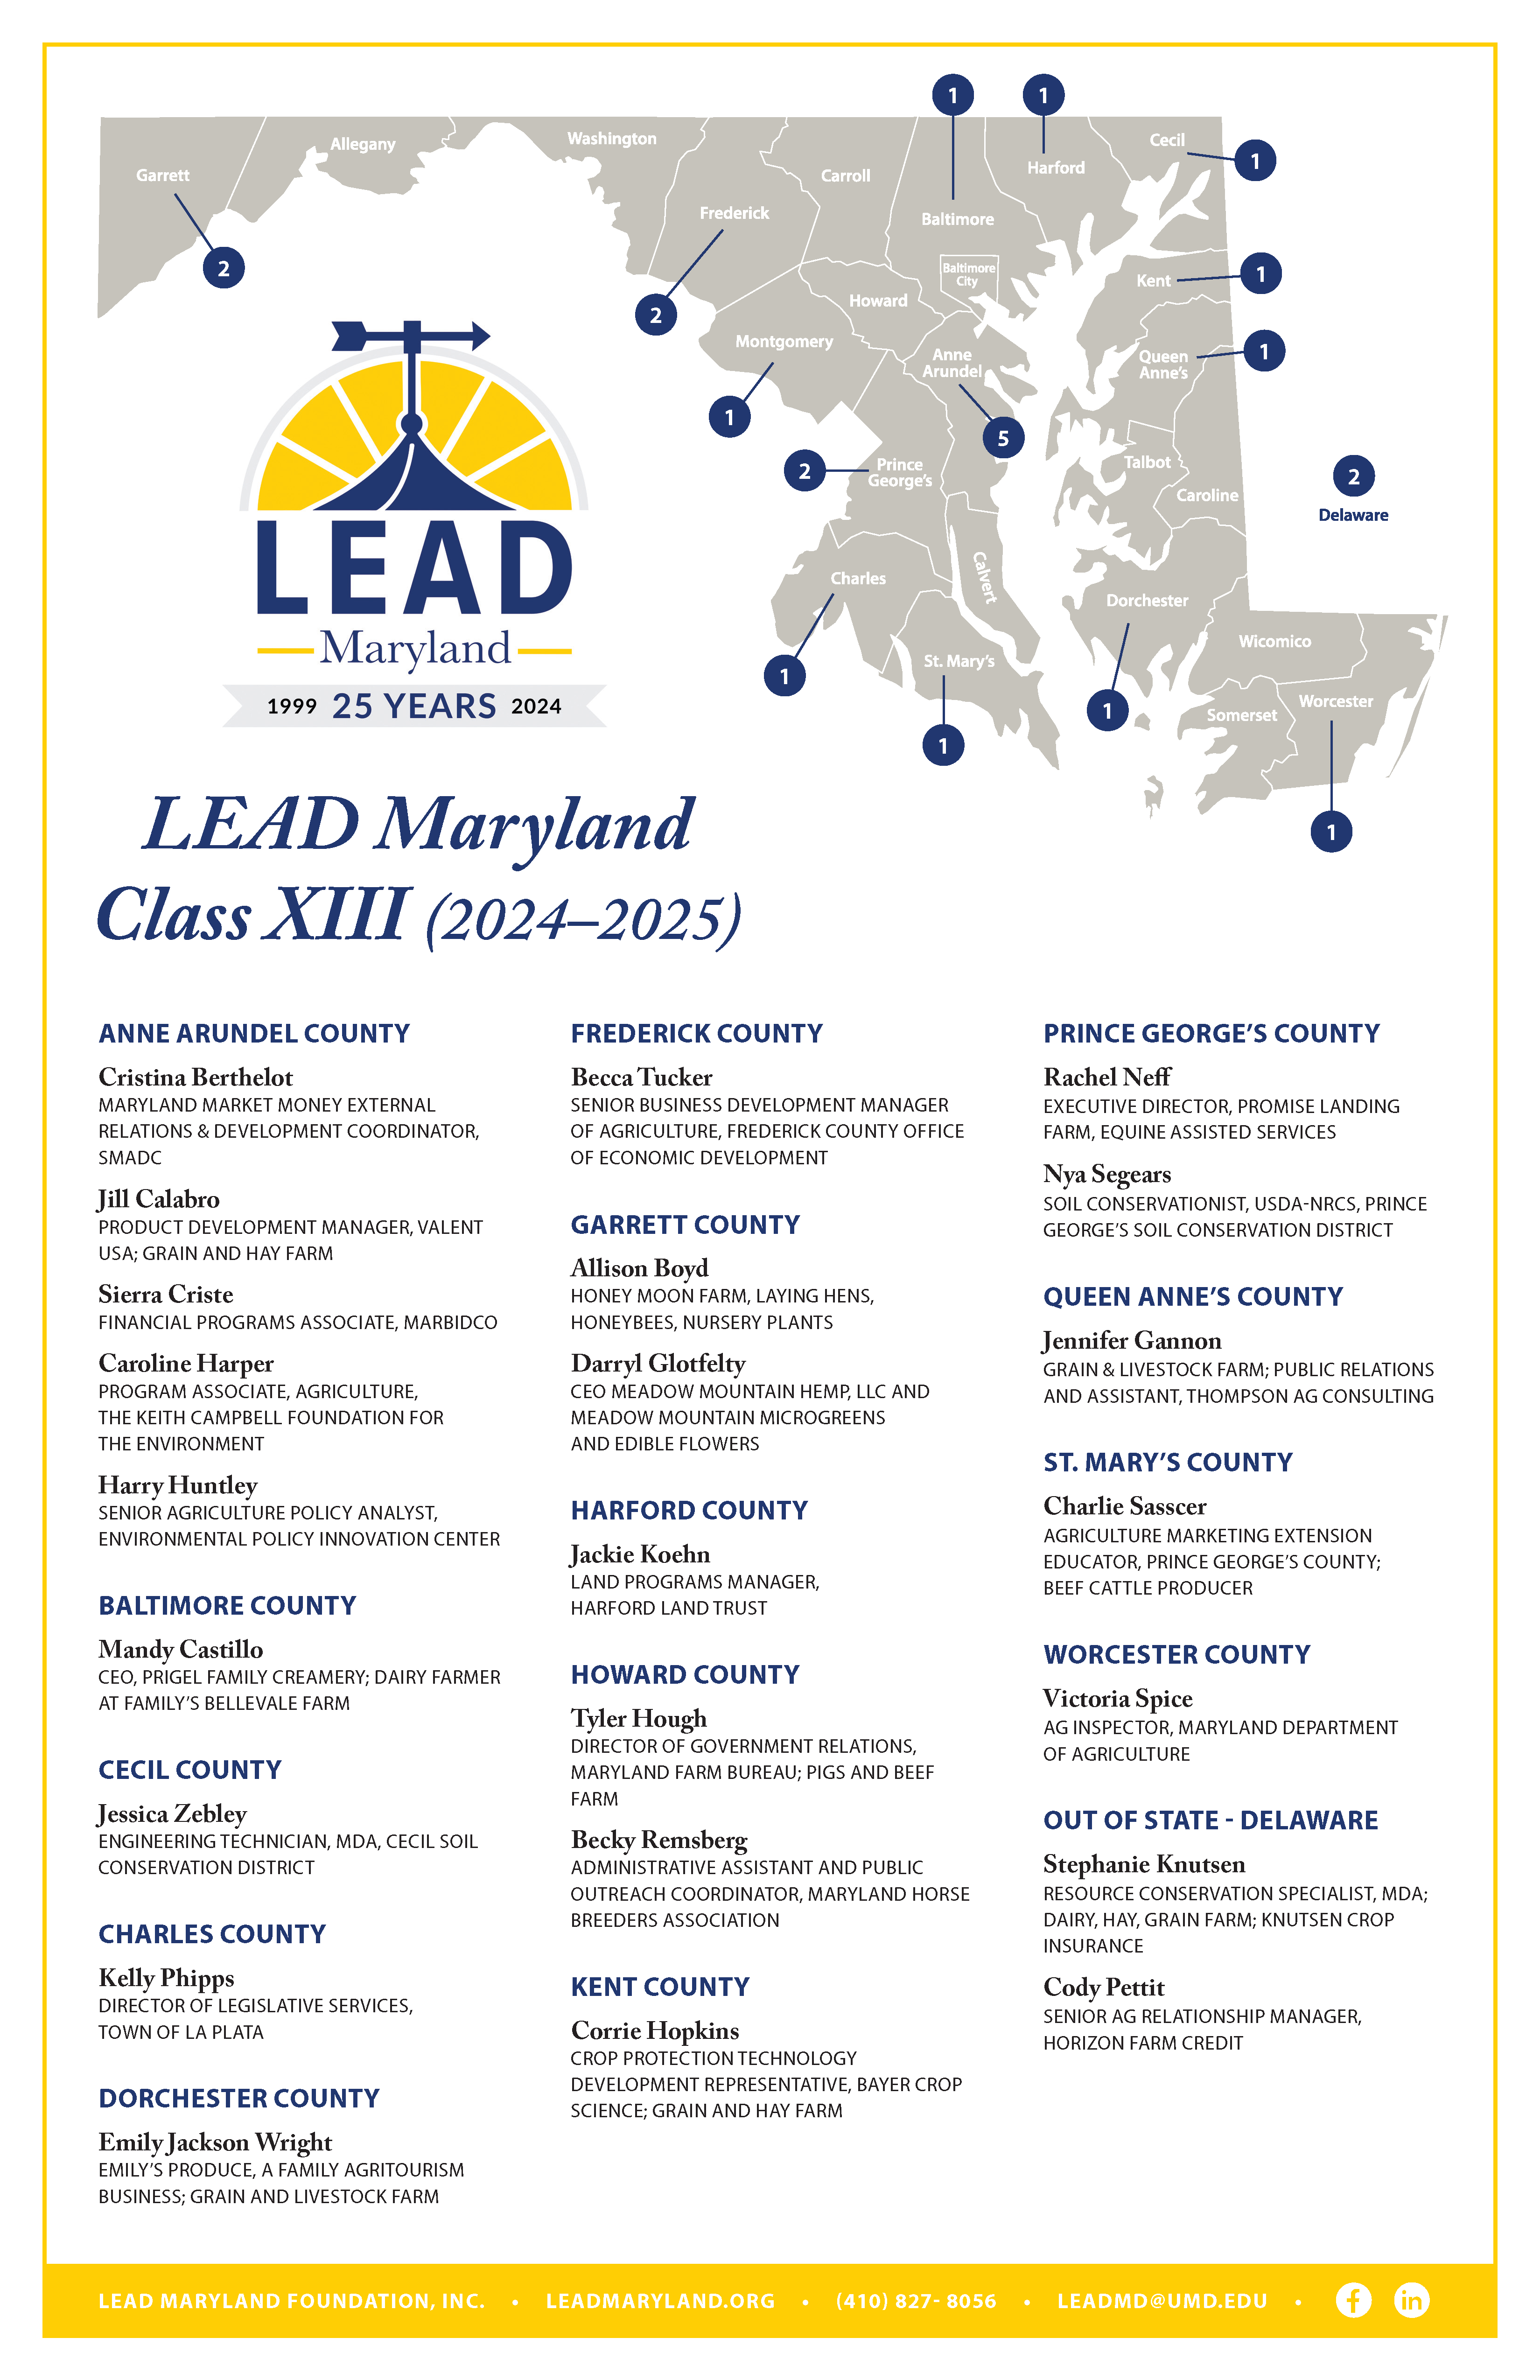 LEAD MD Poster